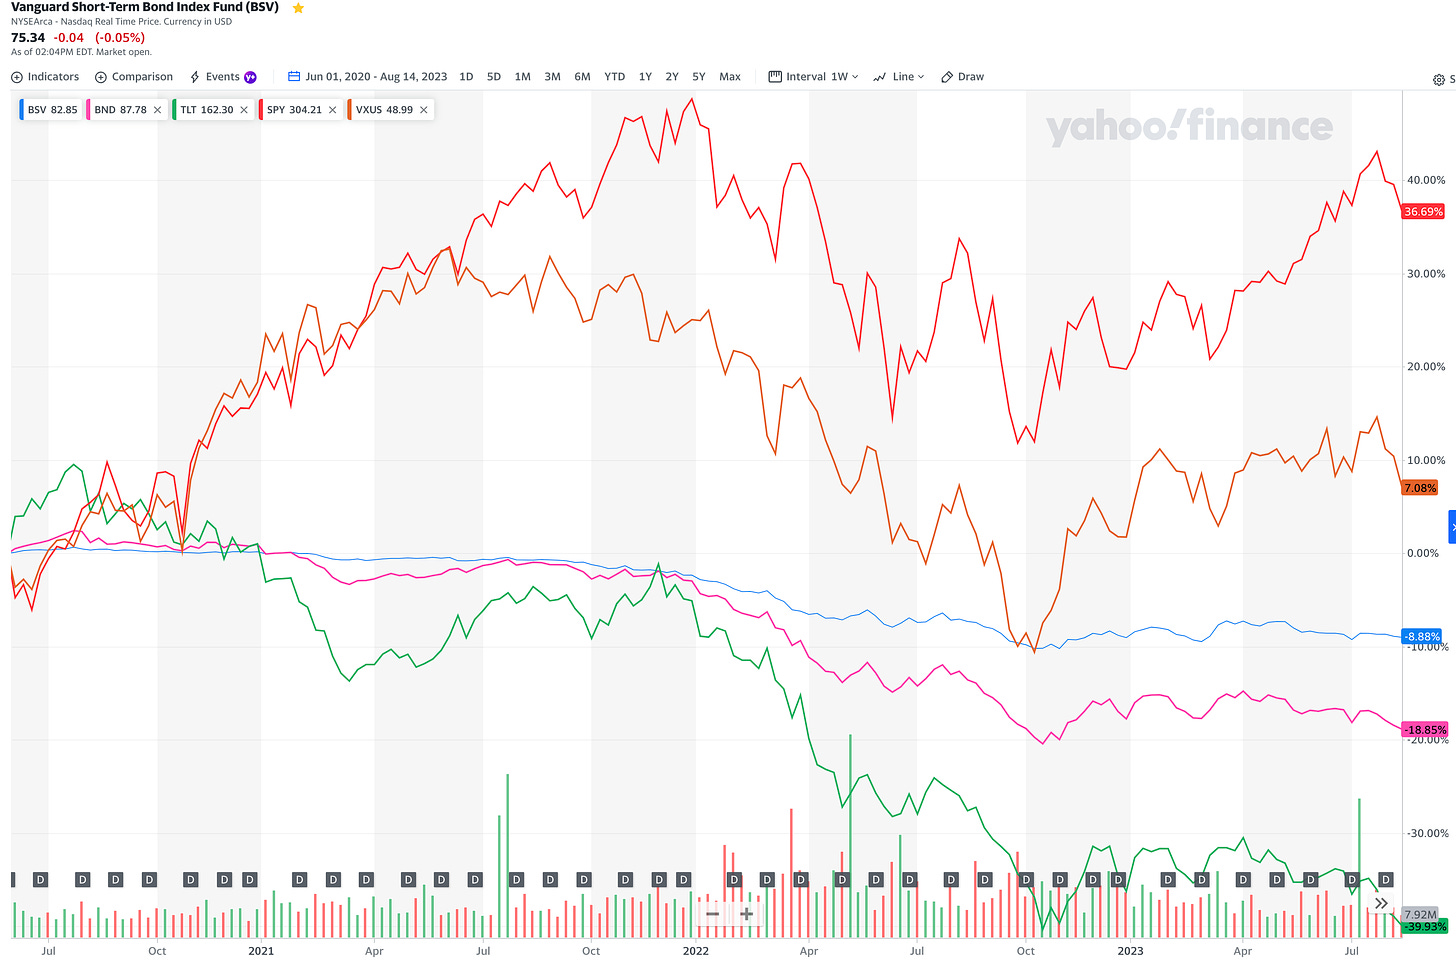 3-Year Trailing Performance of Various Asset Classes